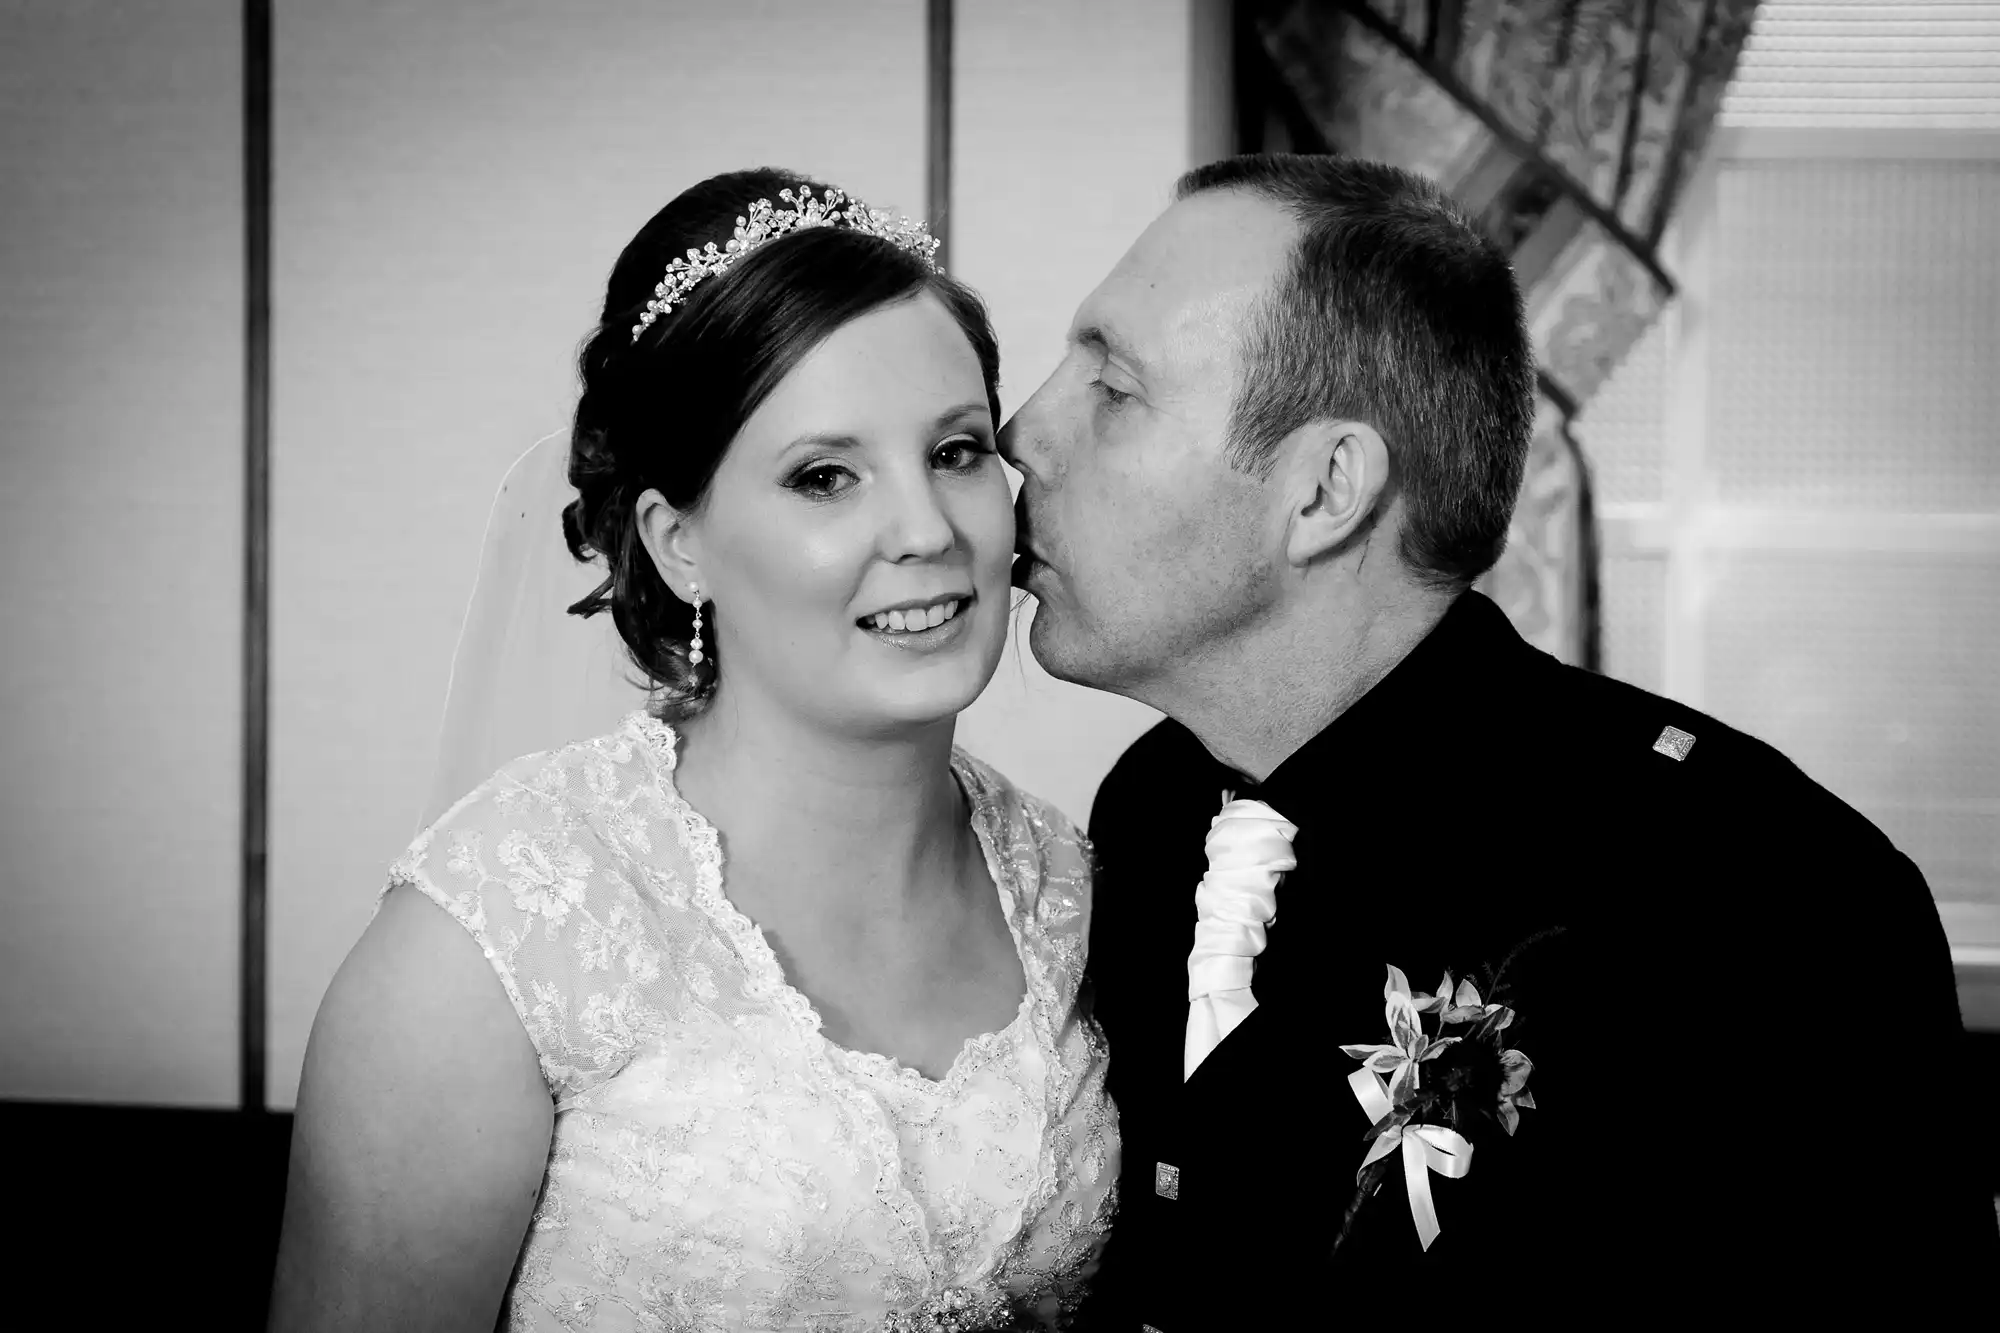 A black and white photo of a bride and groom kissing, with the groom in a tuxedo and the bride wearing a lace dress and tiara.